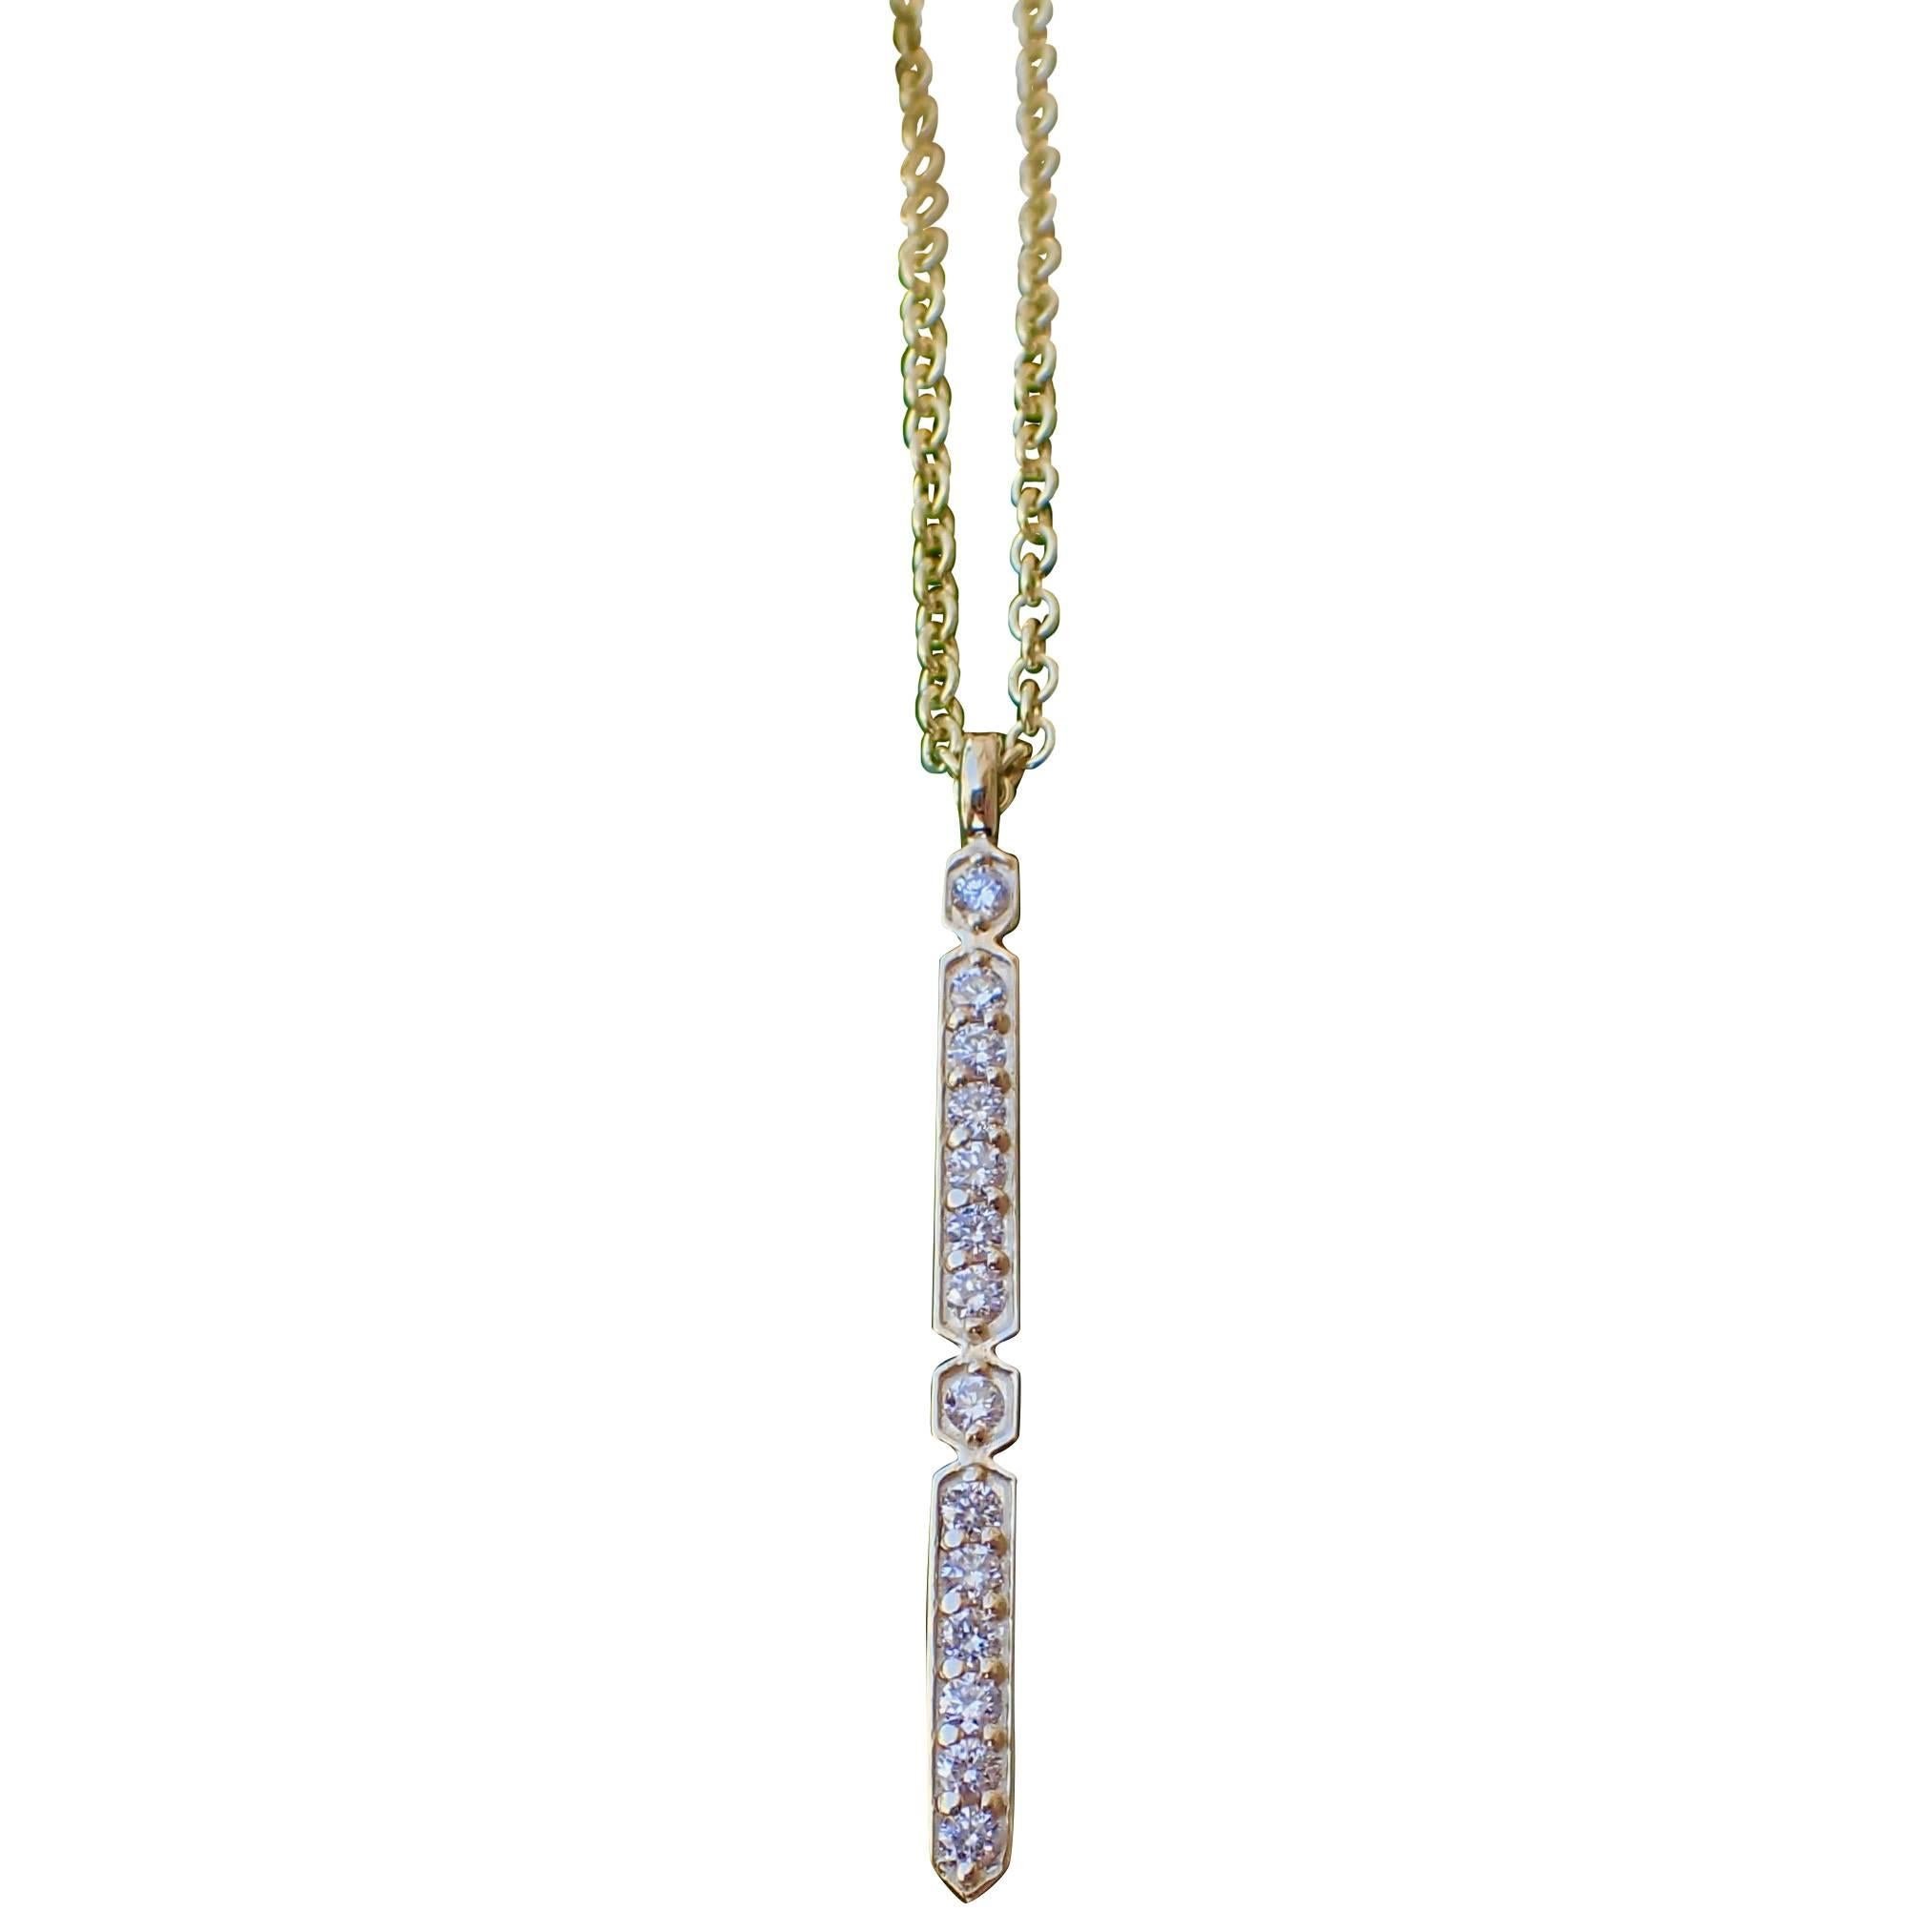 18 Karat Yellow Gold Pendant with 0.21 Carat of Diamond on an Cable Chain